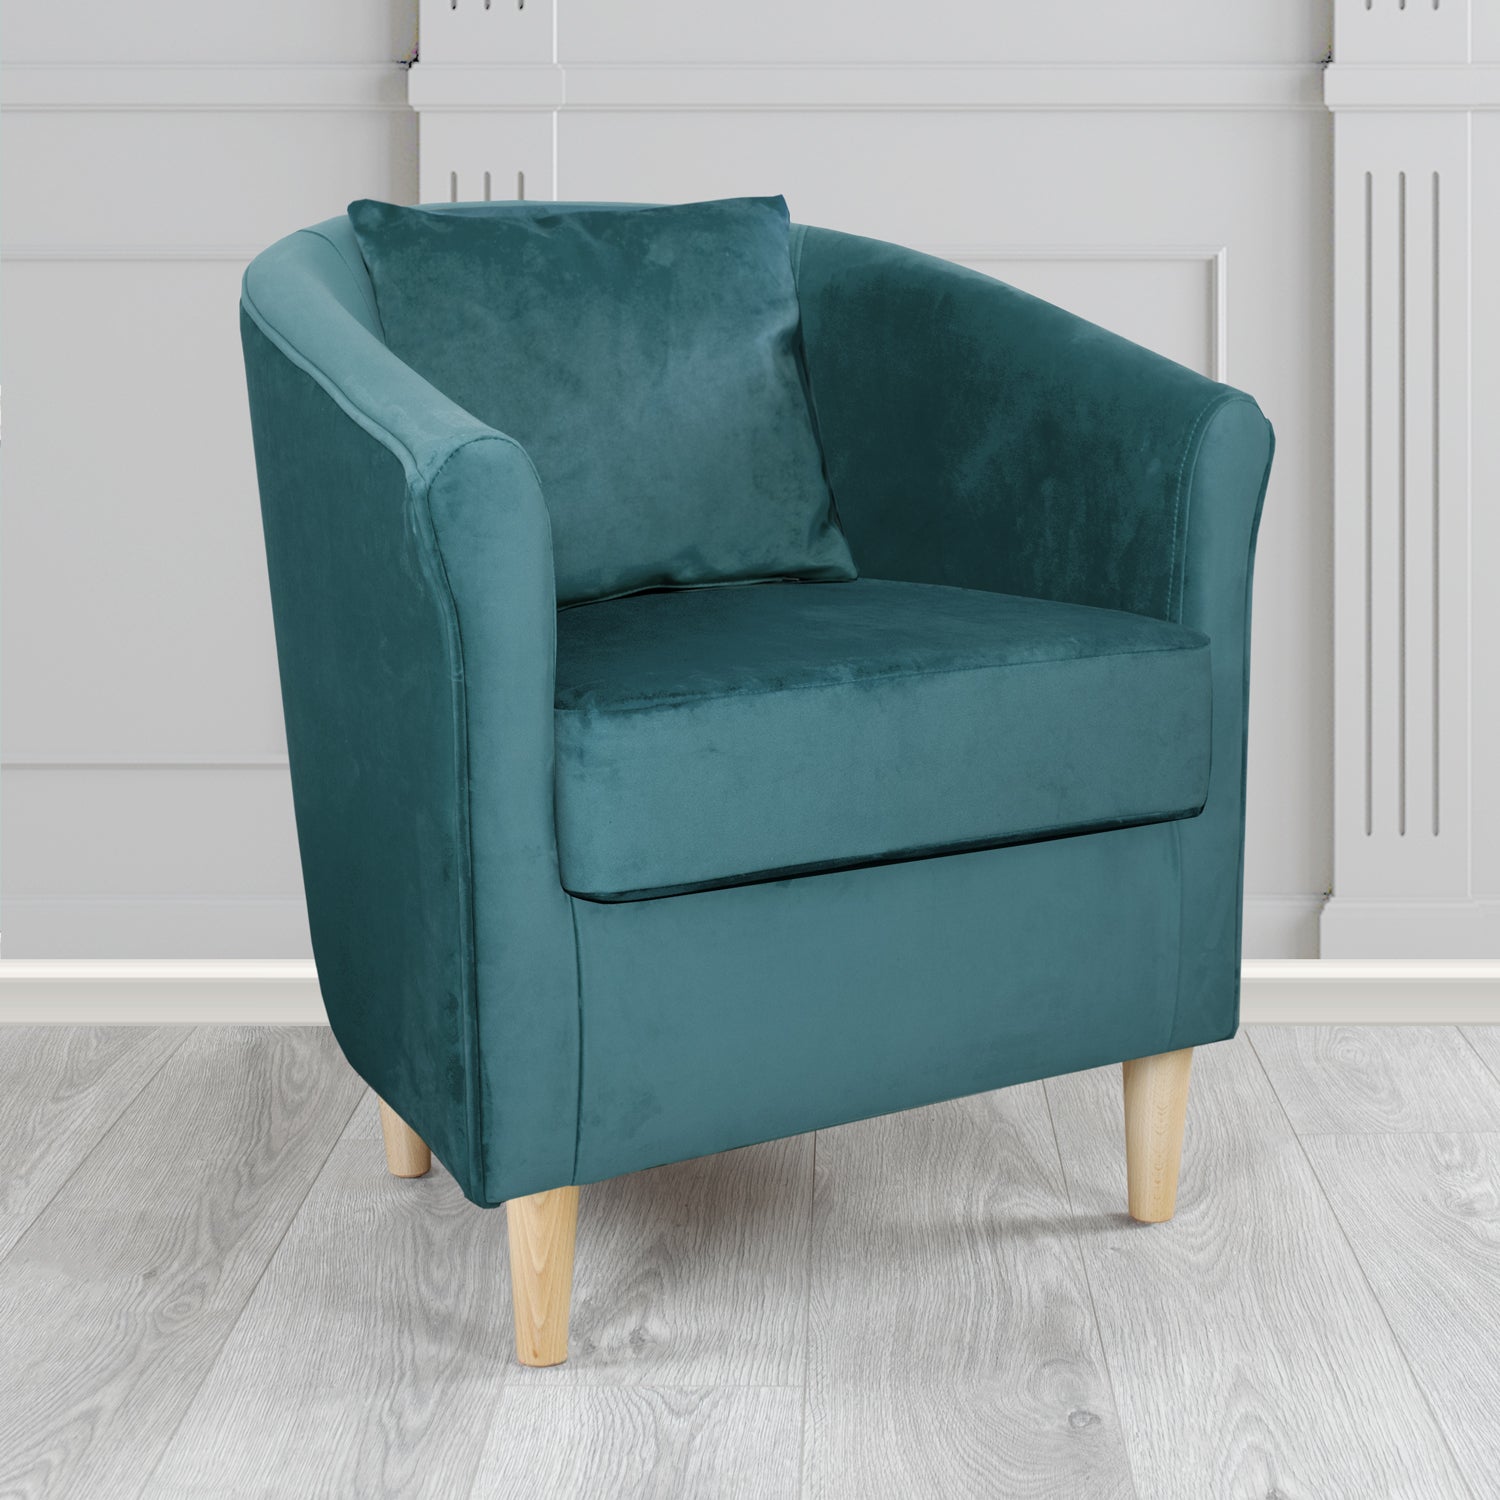 Express St Tropez Monaco Teal Plush Velvet Fabric Tub Chair with Scatter Cushion (6604889980970)